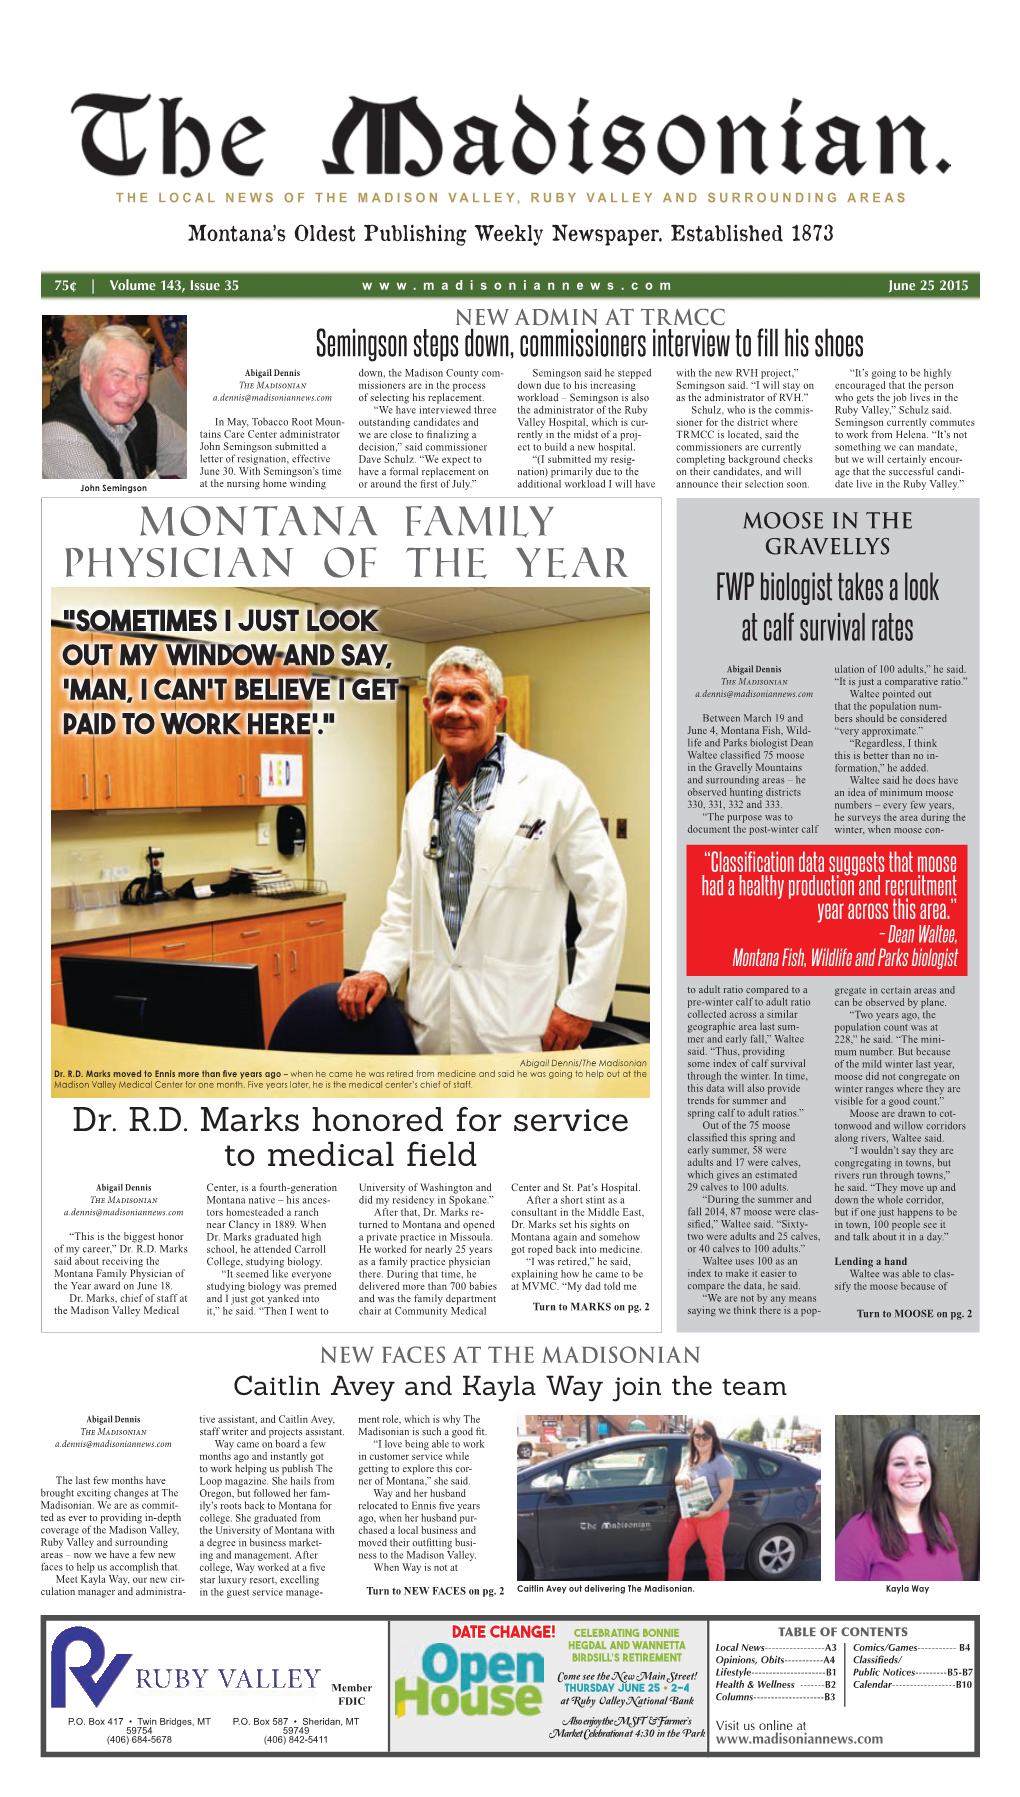 Montana Family Physician of the Year